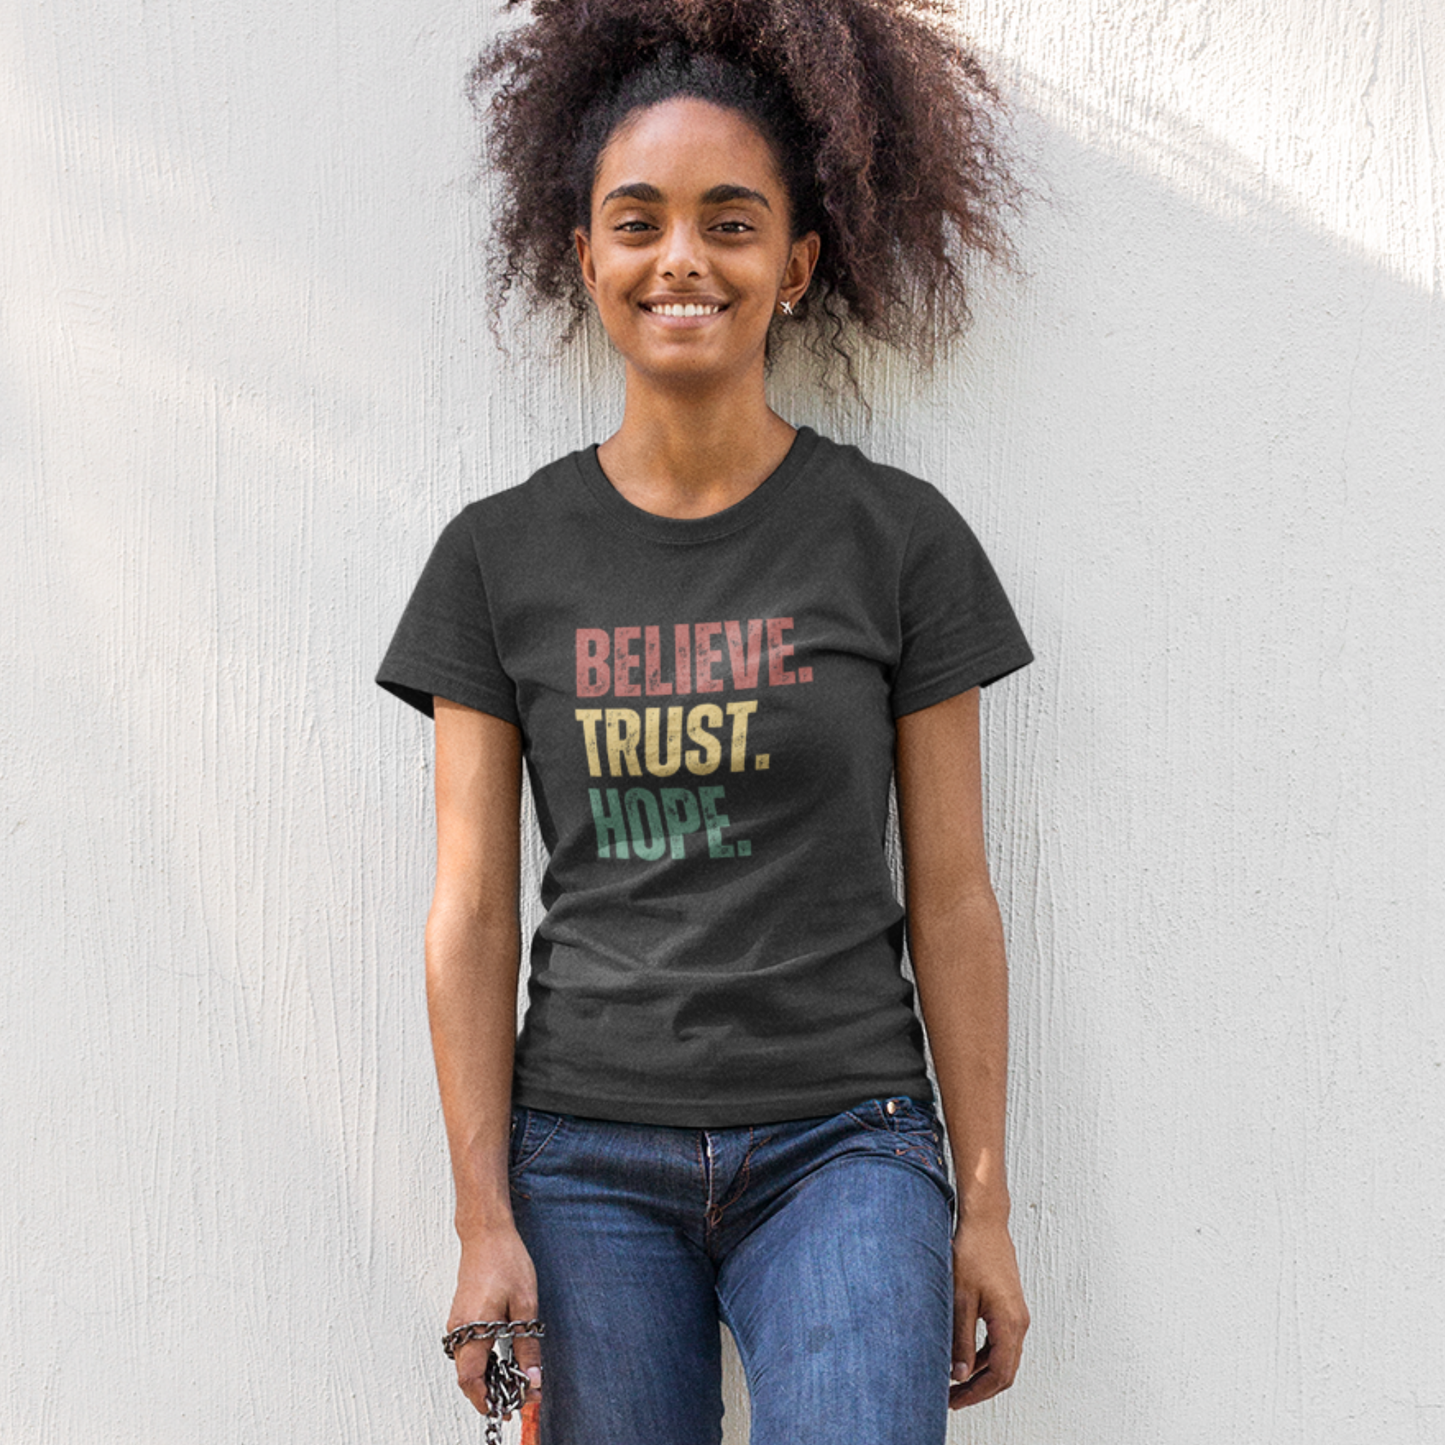 Unisex Jersey Short Sleeve Tee, Believe, Trust, Hope T-Shirt, LDS Youth, Relief Society, Retro t-shirt